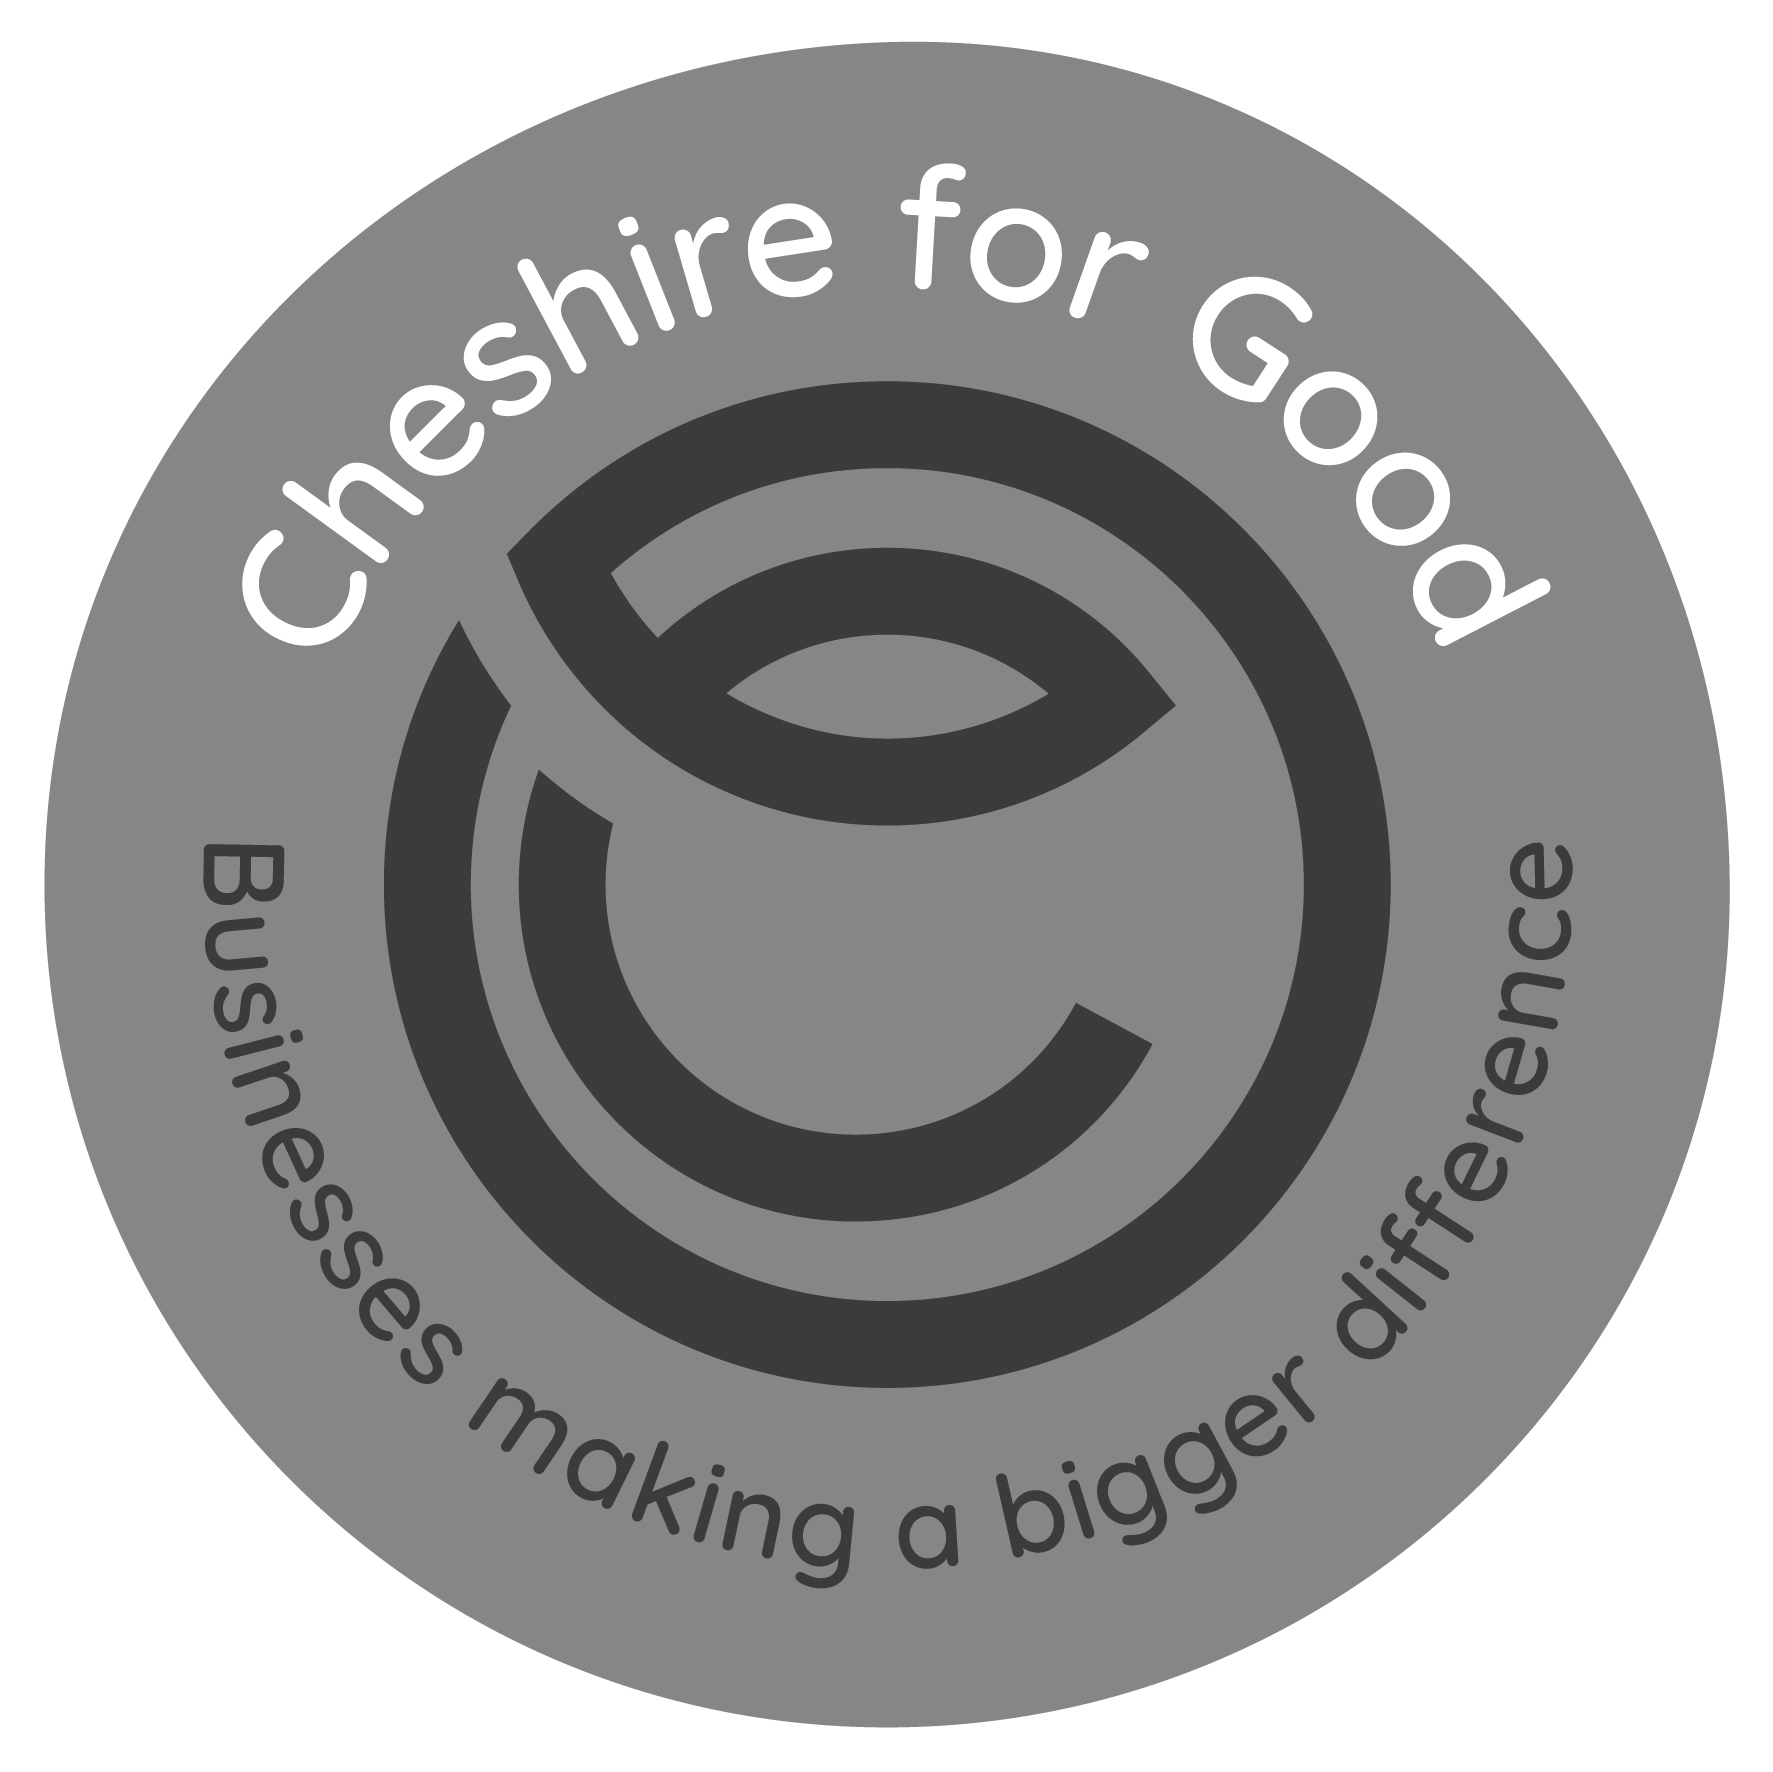 Cheshire for Good logo